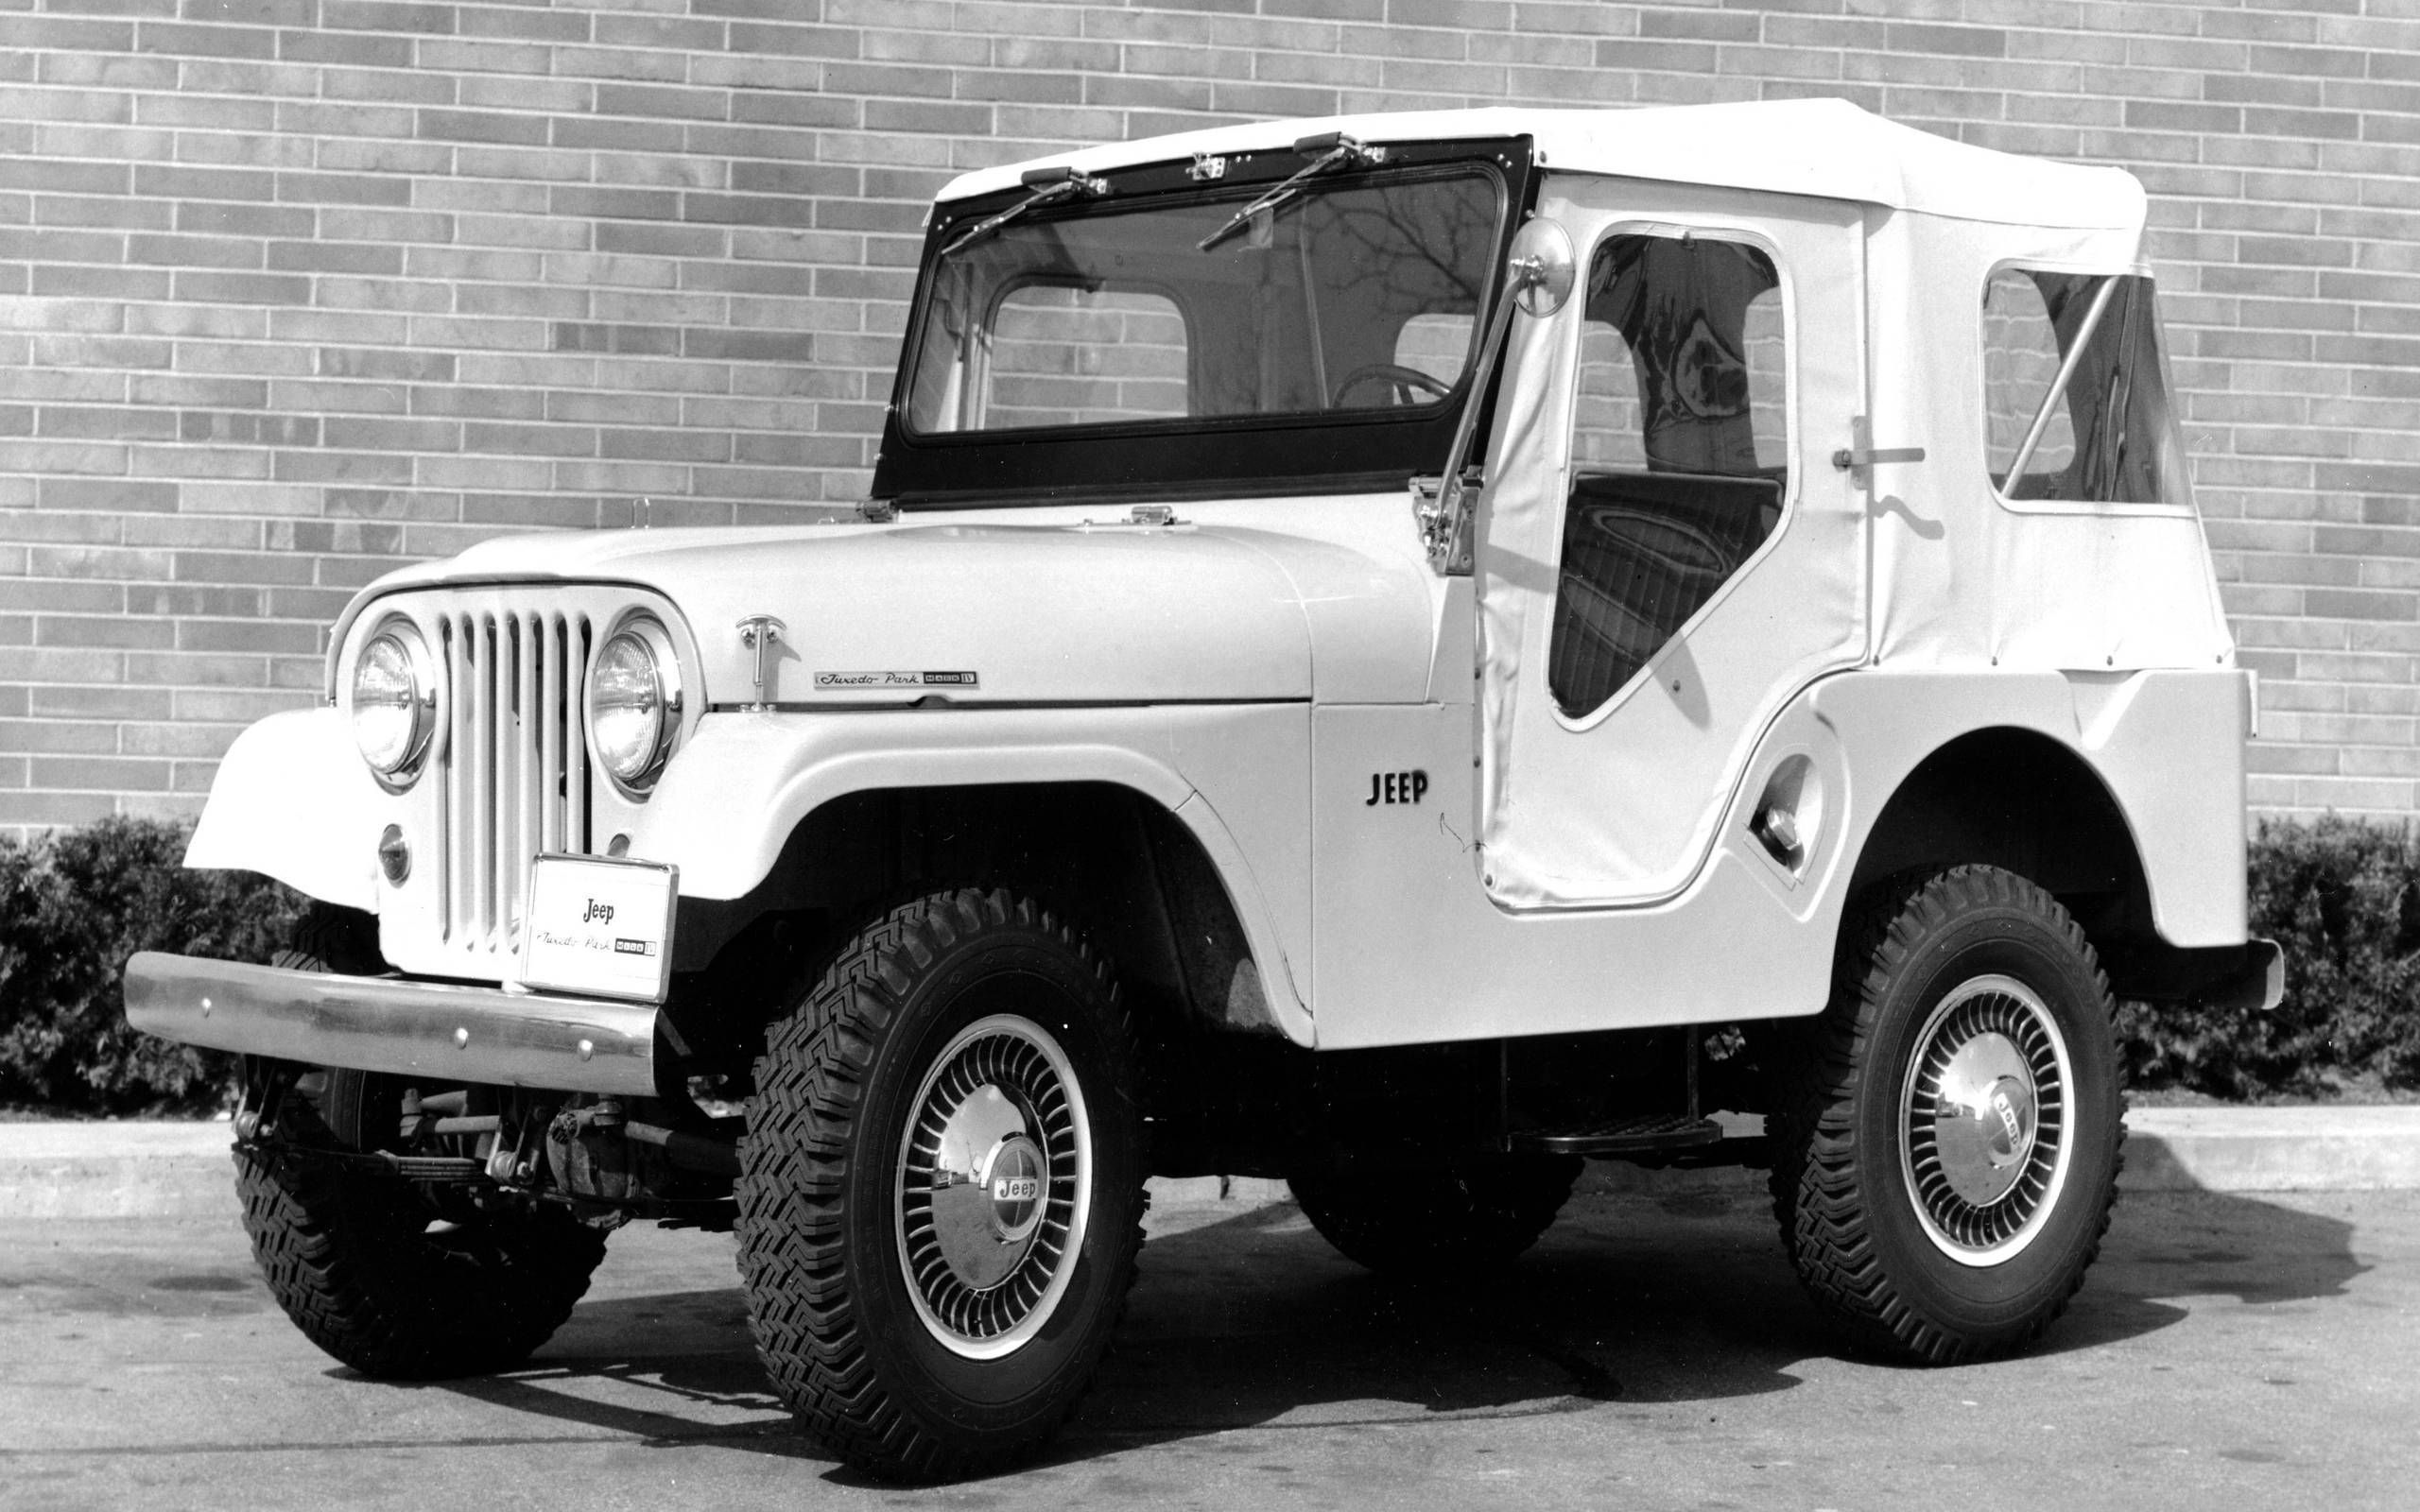 Gallery: 75 years of Jeep